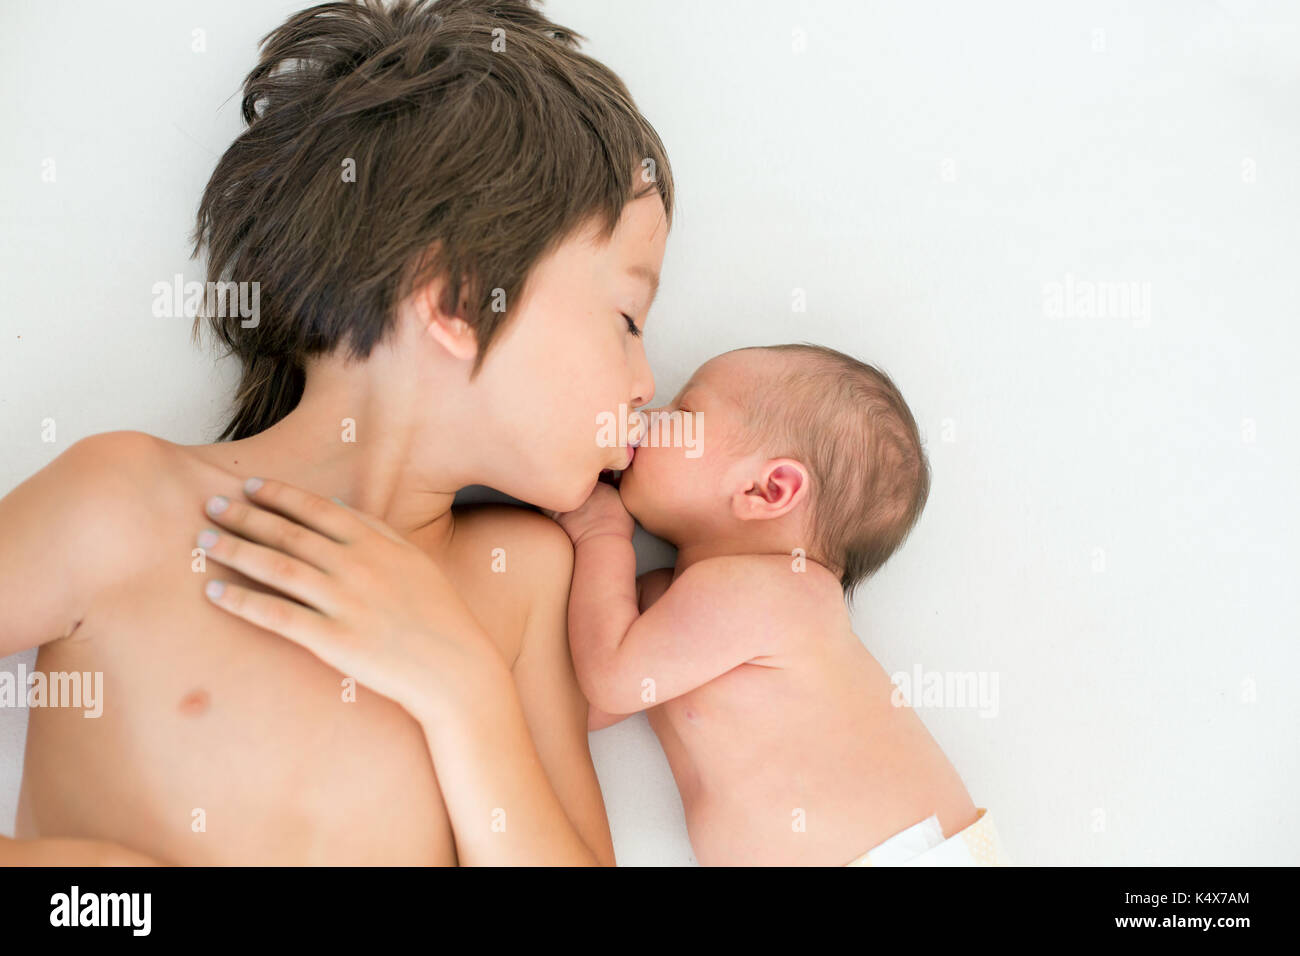 Beautiful boy, hugging with tenderness and care his newborn baby brother at home. Family love happiness concept Stock Photo